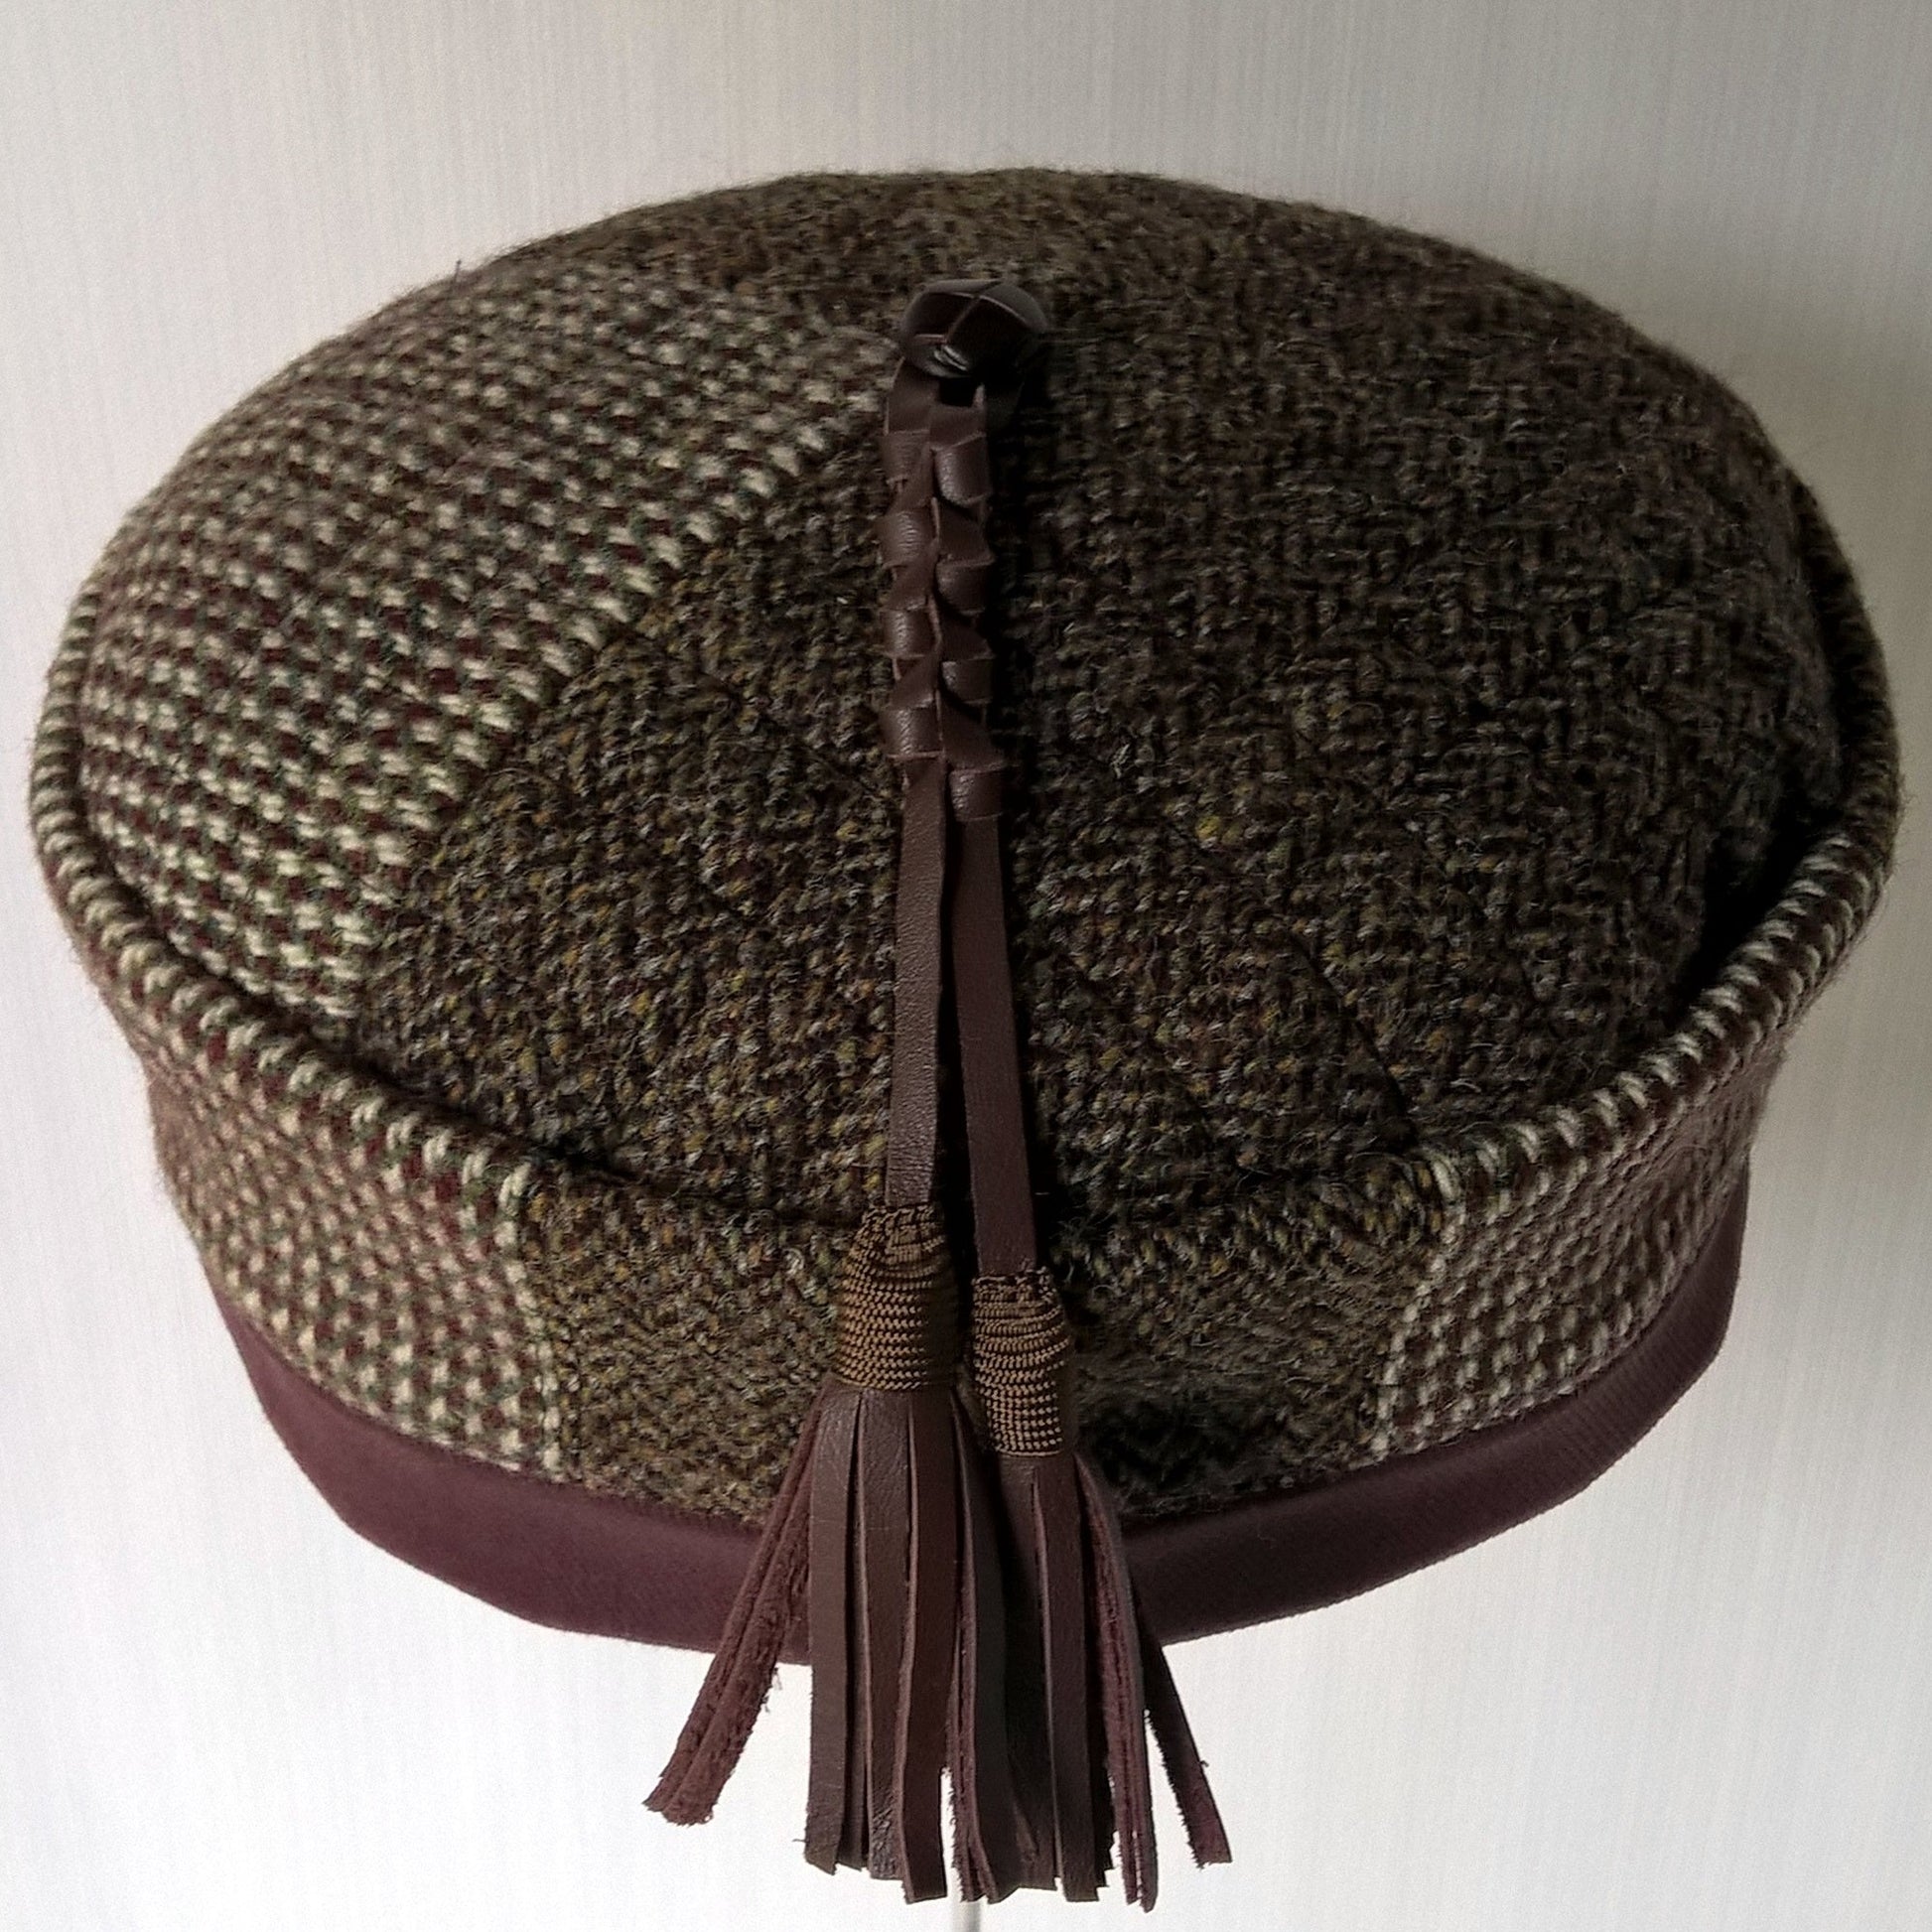 This hat is a patchwork of mismatched tweed 